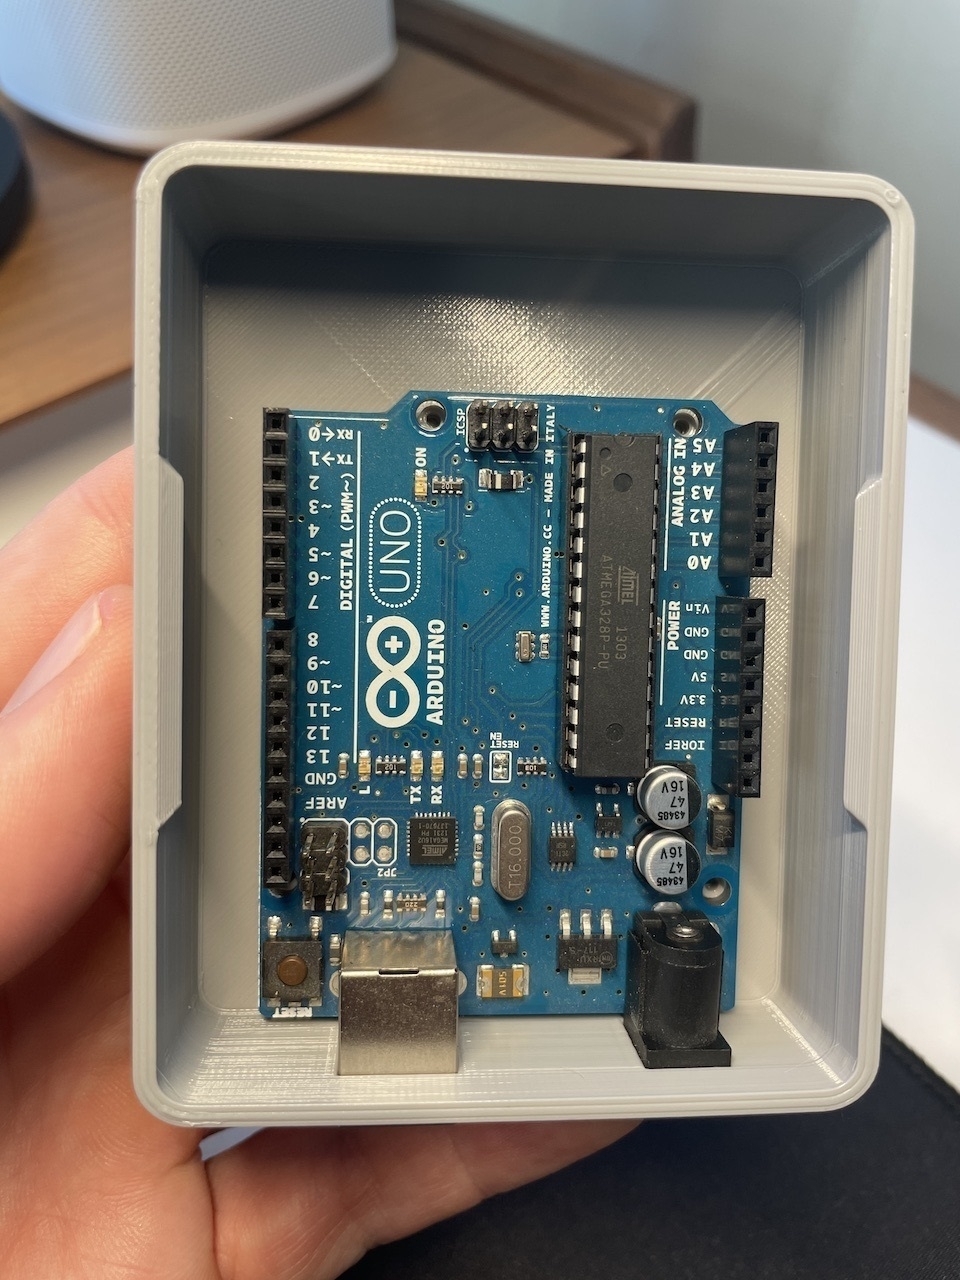 Printed Arduino box from top